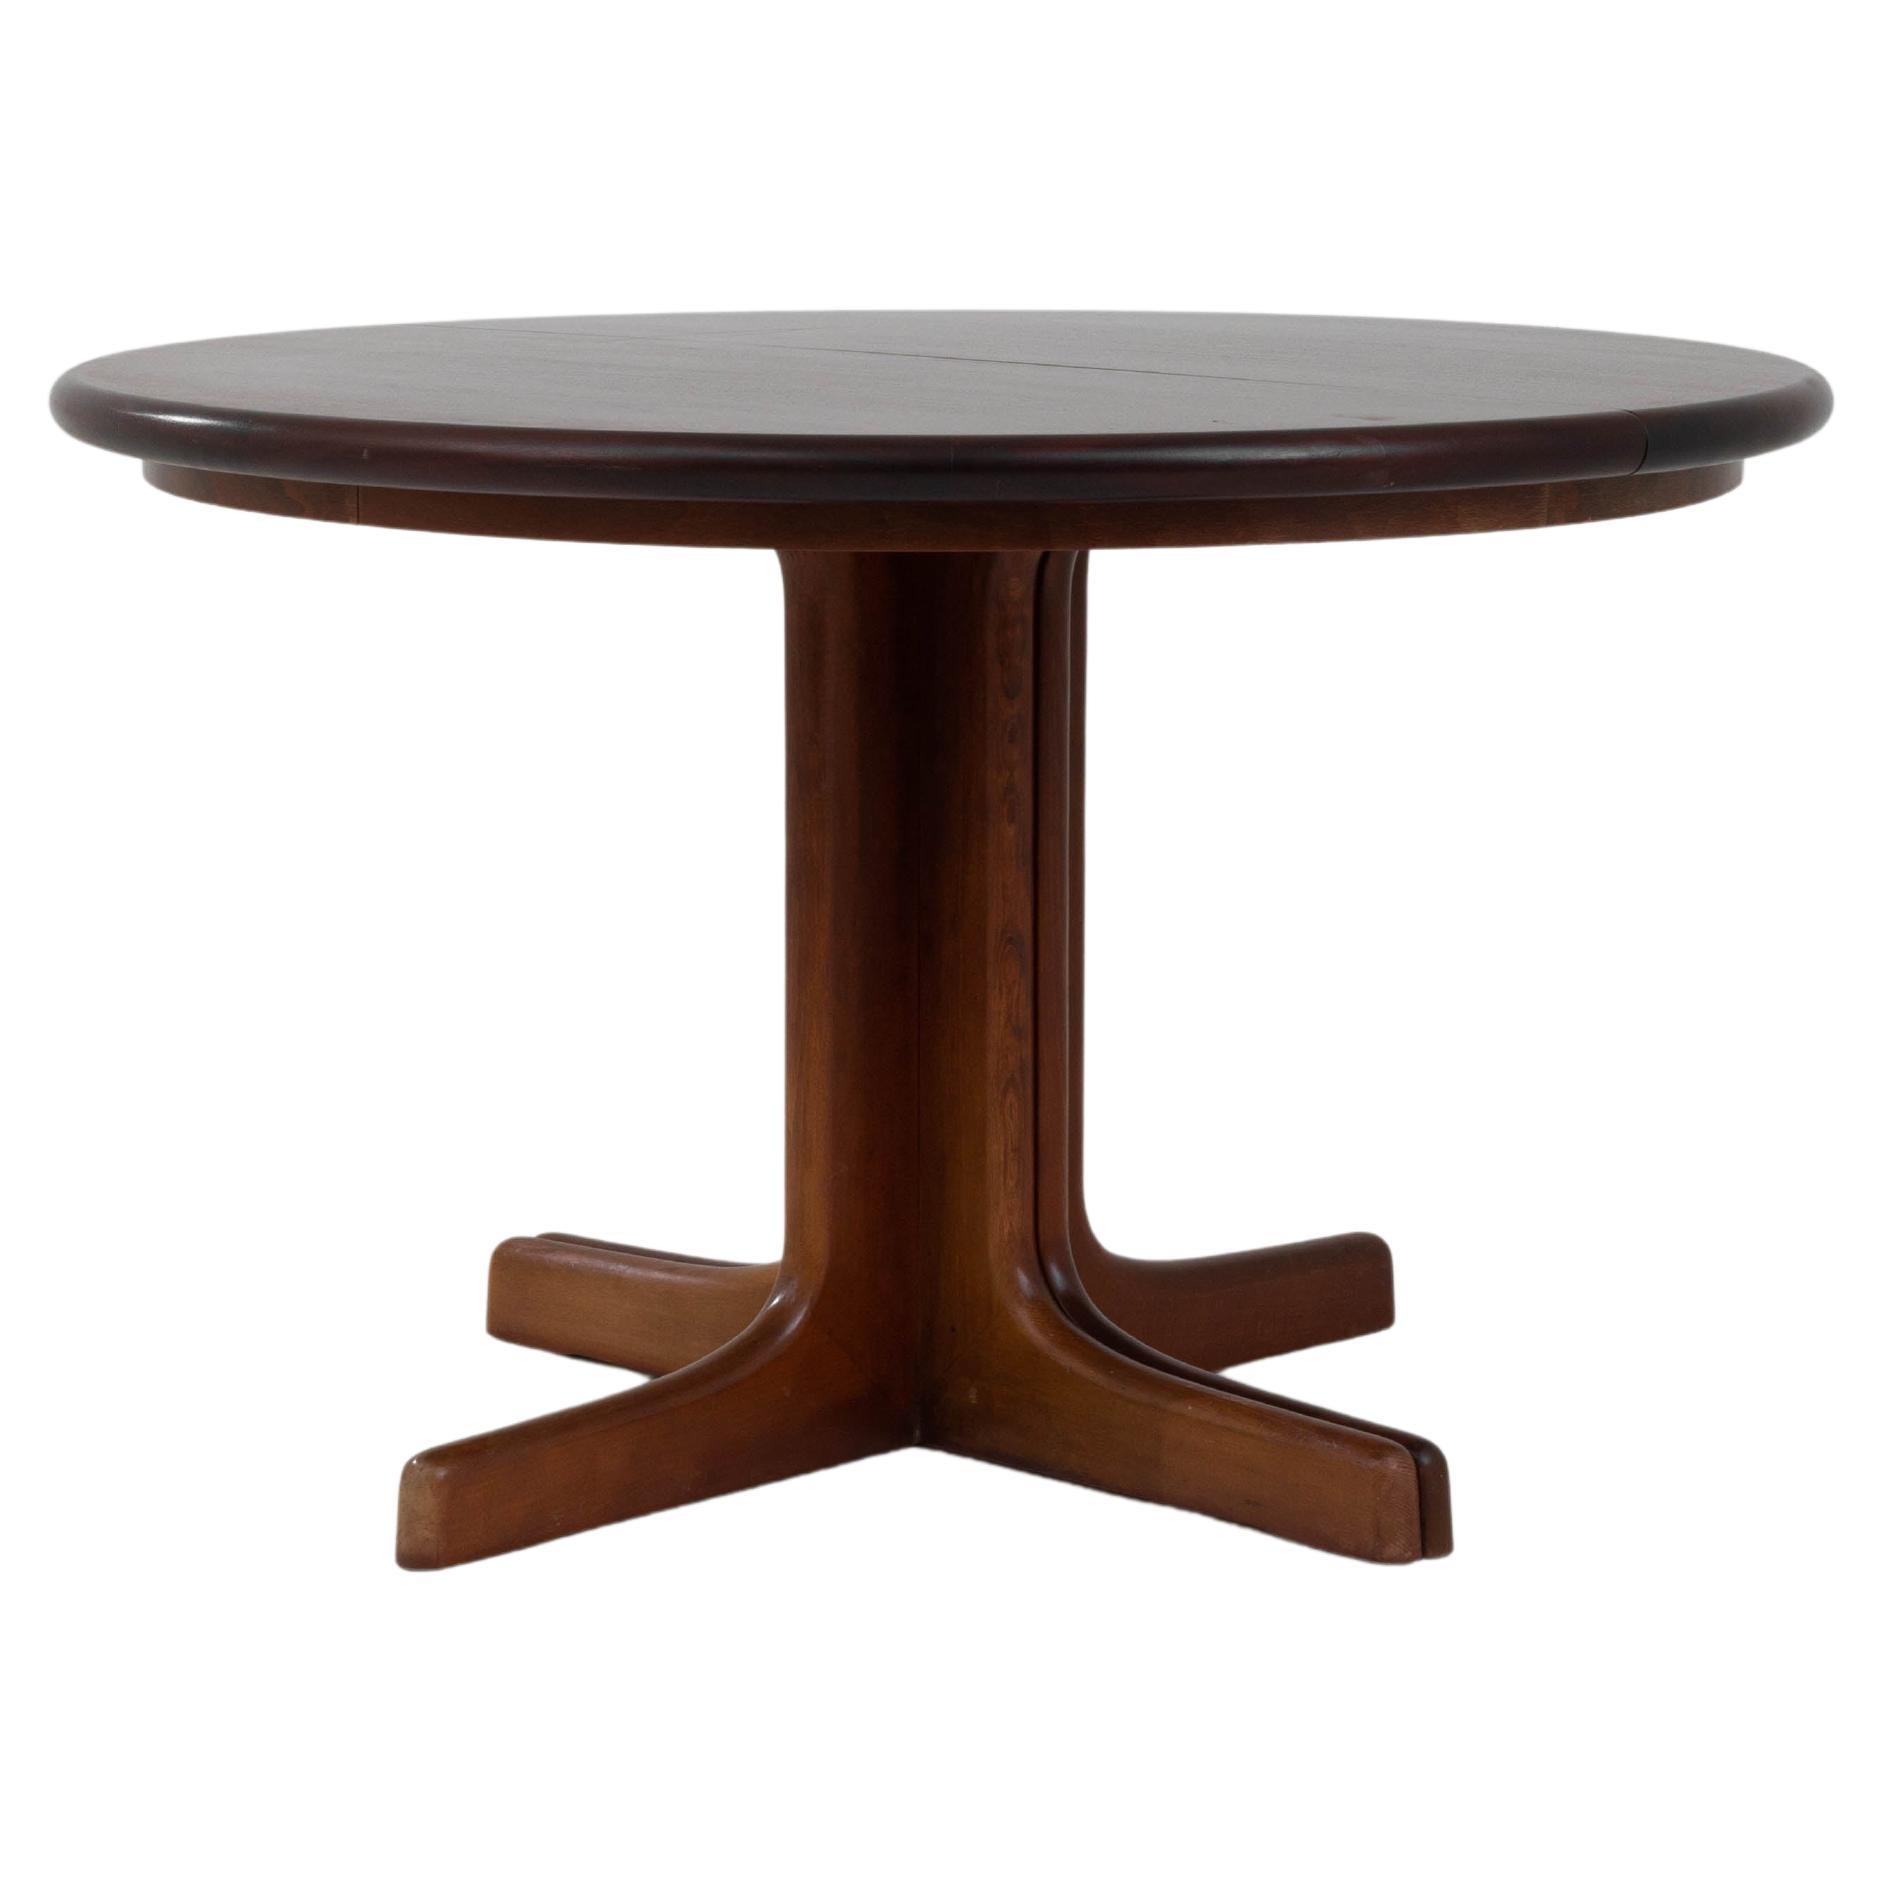 20th Century German Wooden Dining Table By Casala